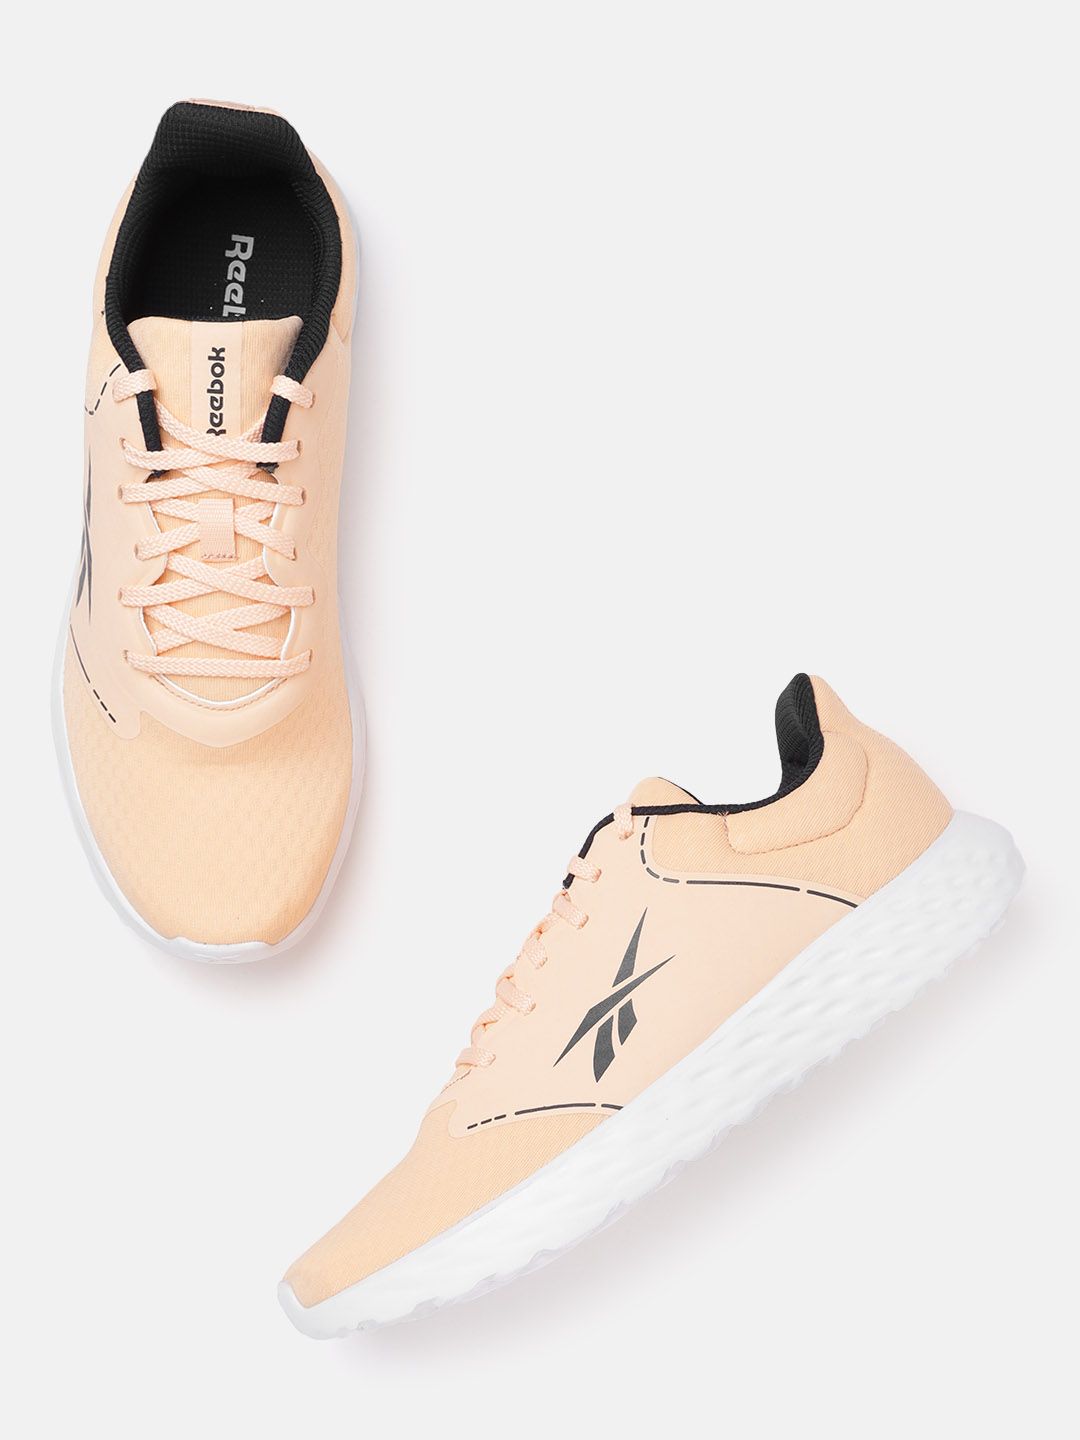 Reebok Women Peach-Coloured & Navy Blue Brand Logo Print Authentic Running Shoes Price in India